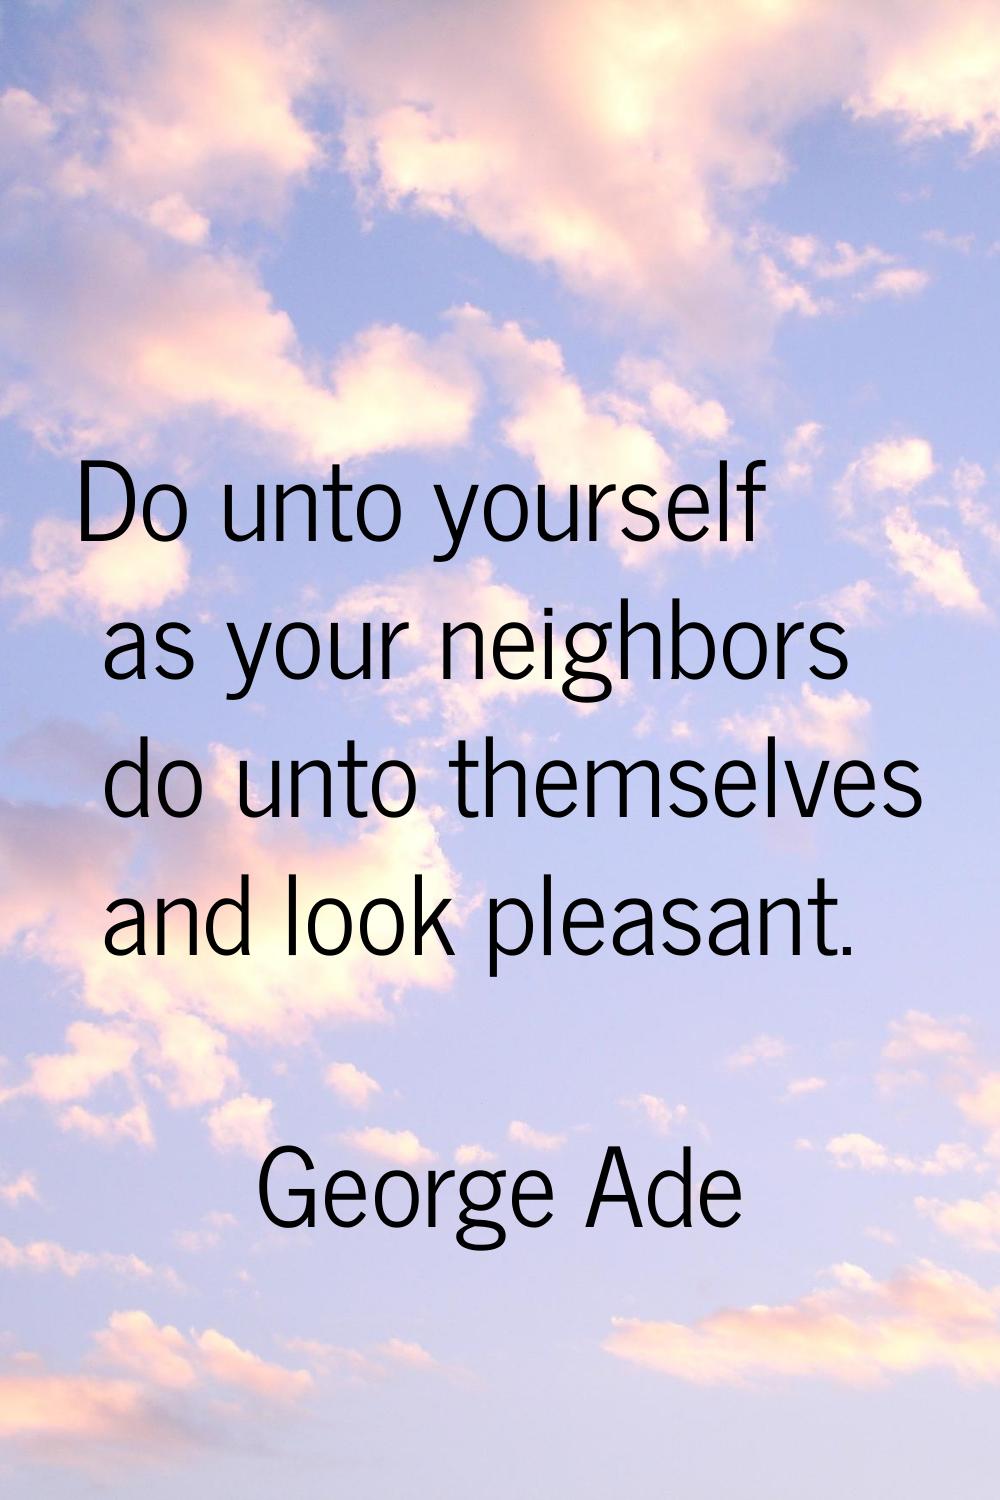 Do unto yourself as your neighbors do unto themselves and look pleasant.